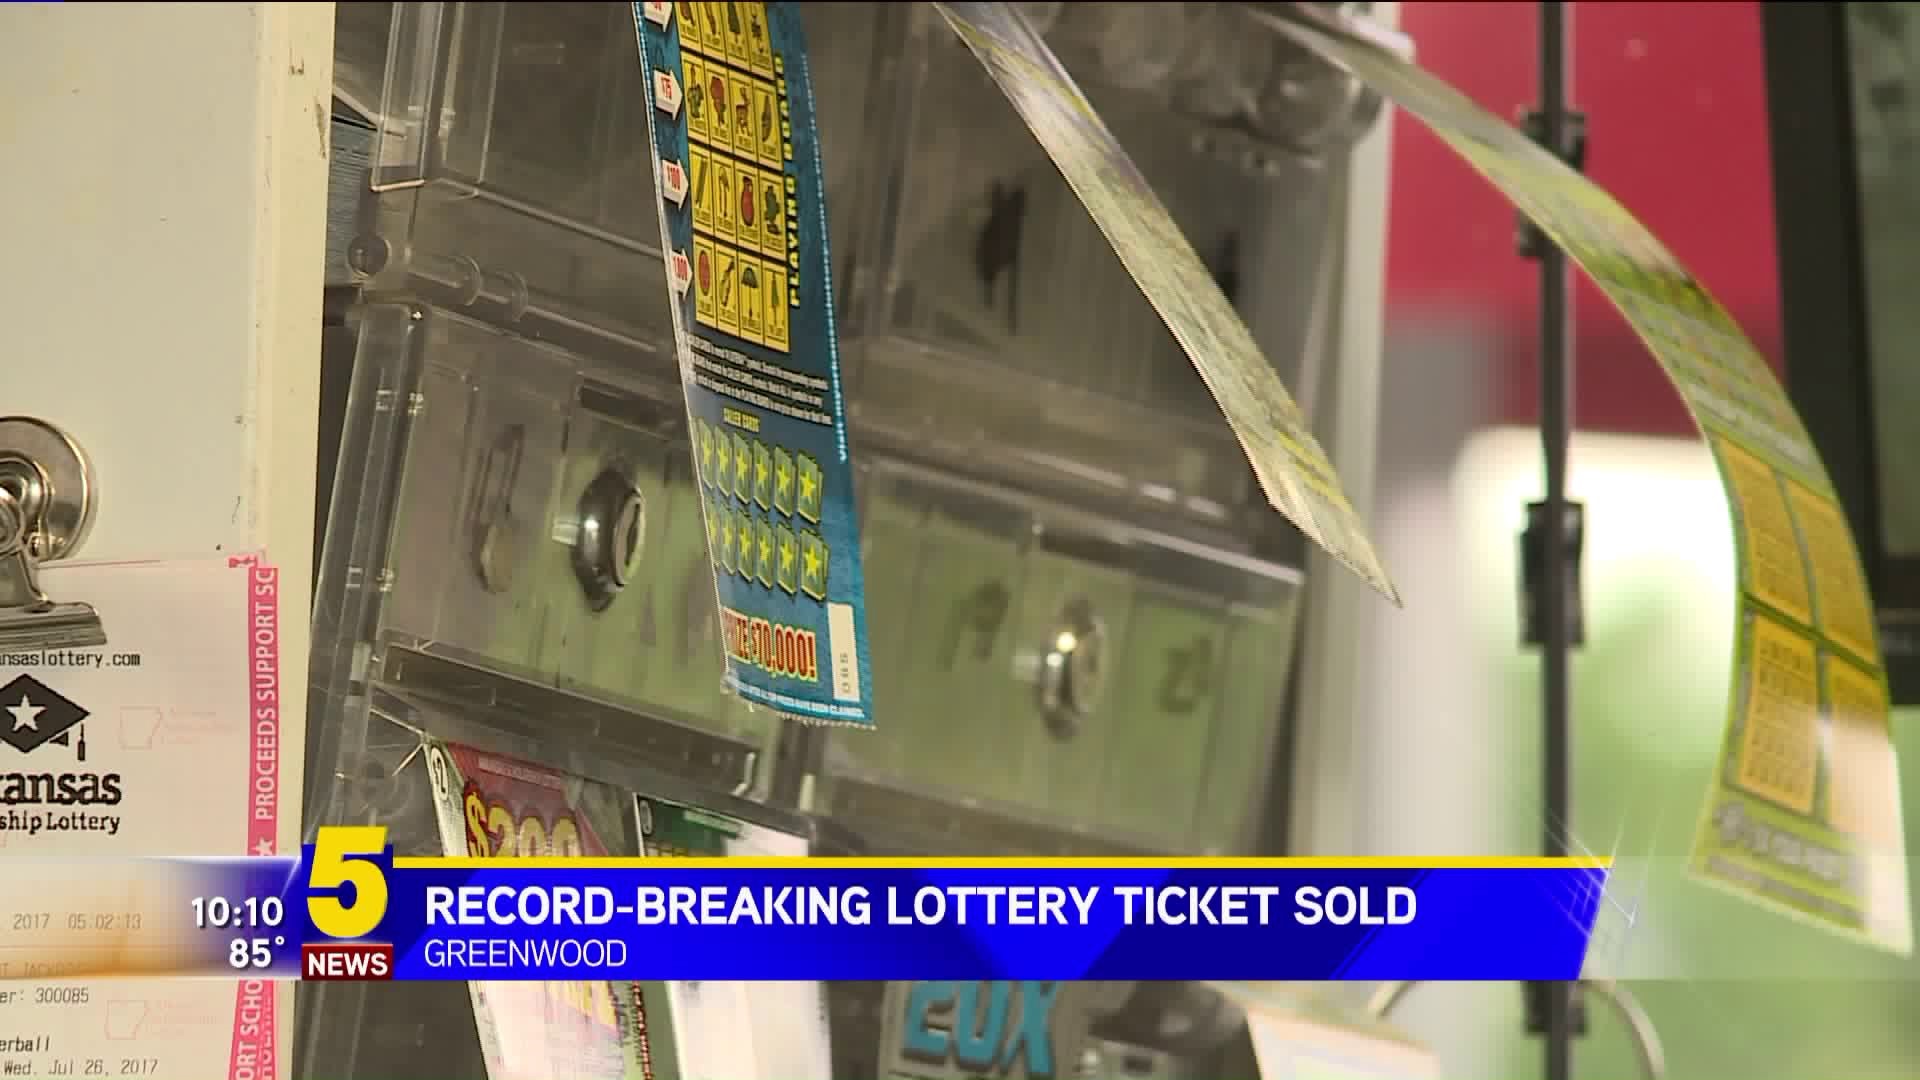 Record-Breaking Lottery Ticket Sold